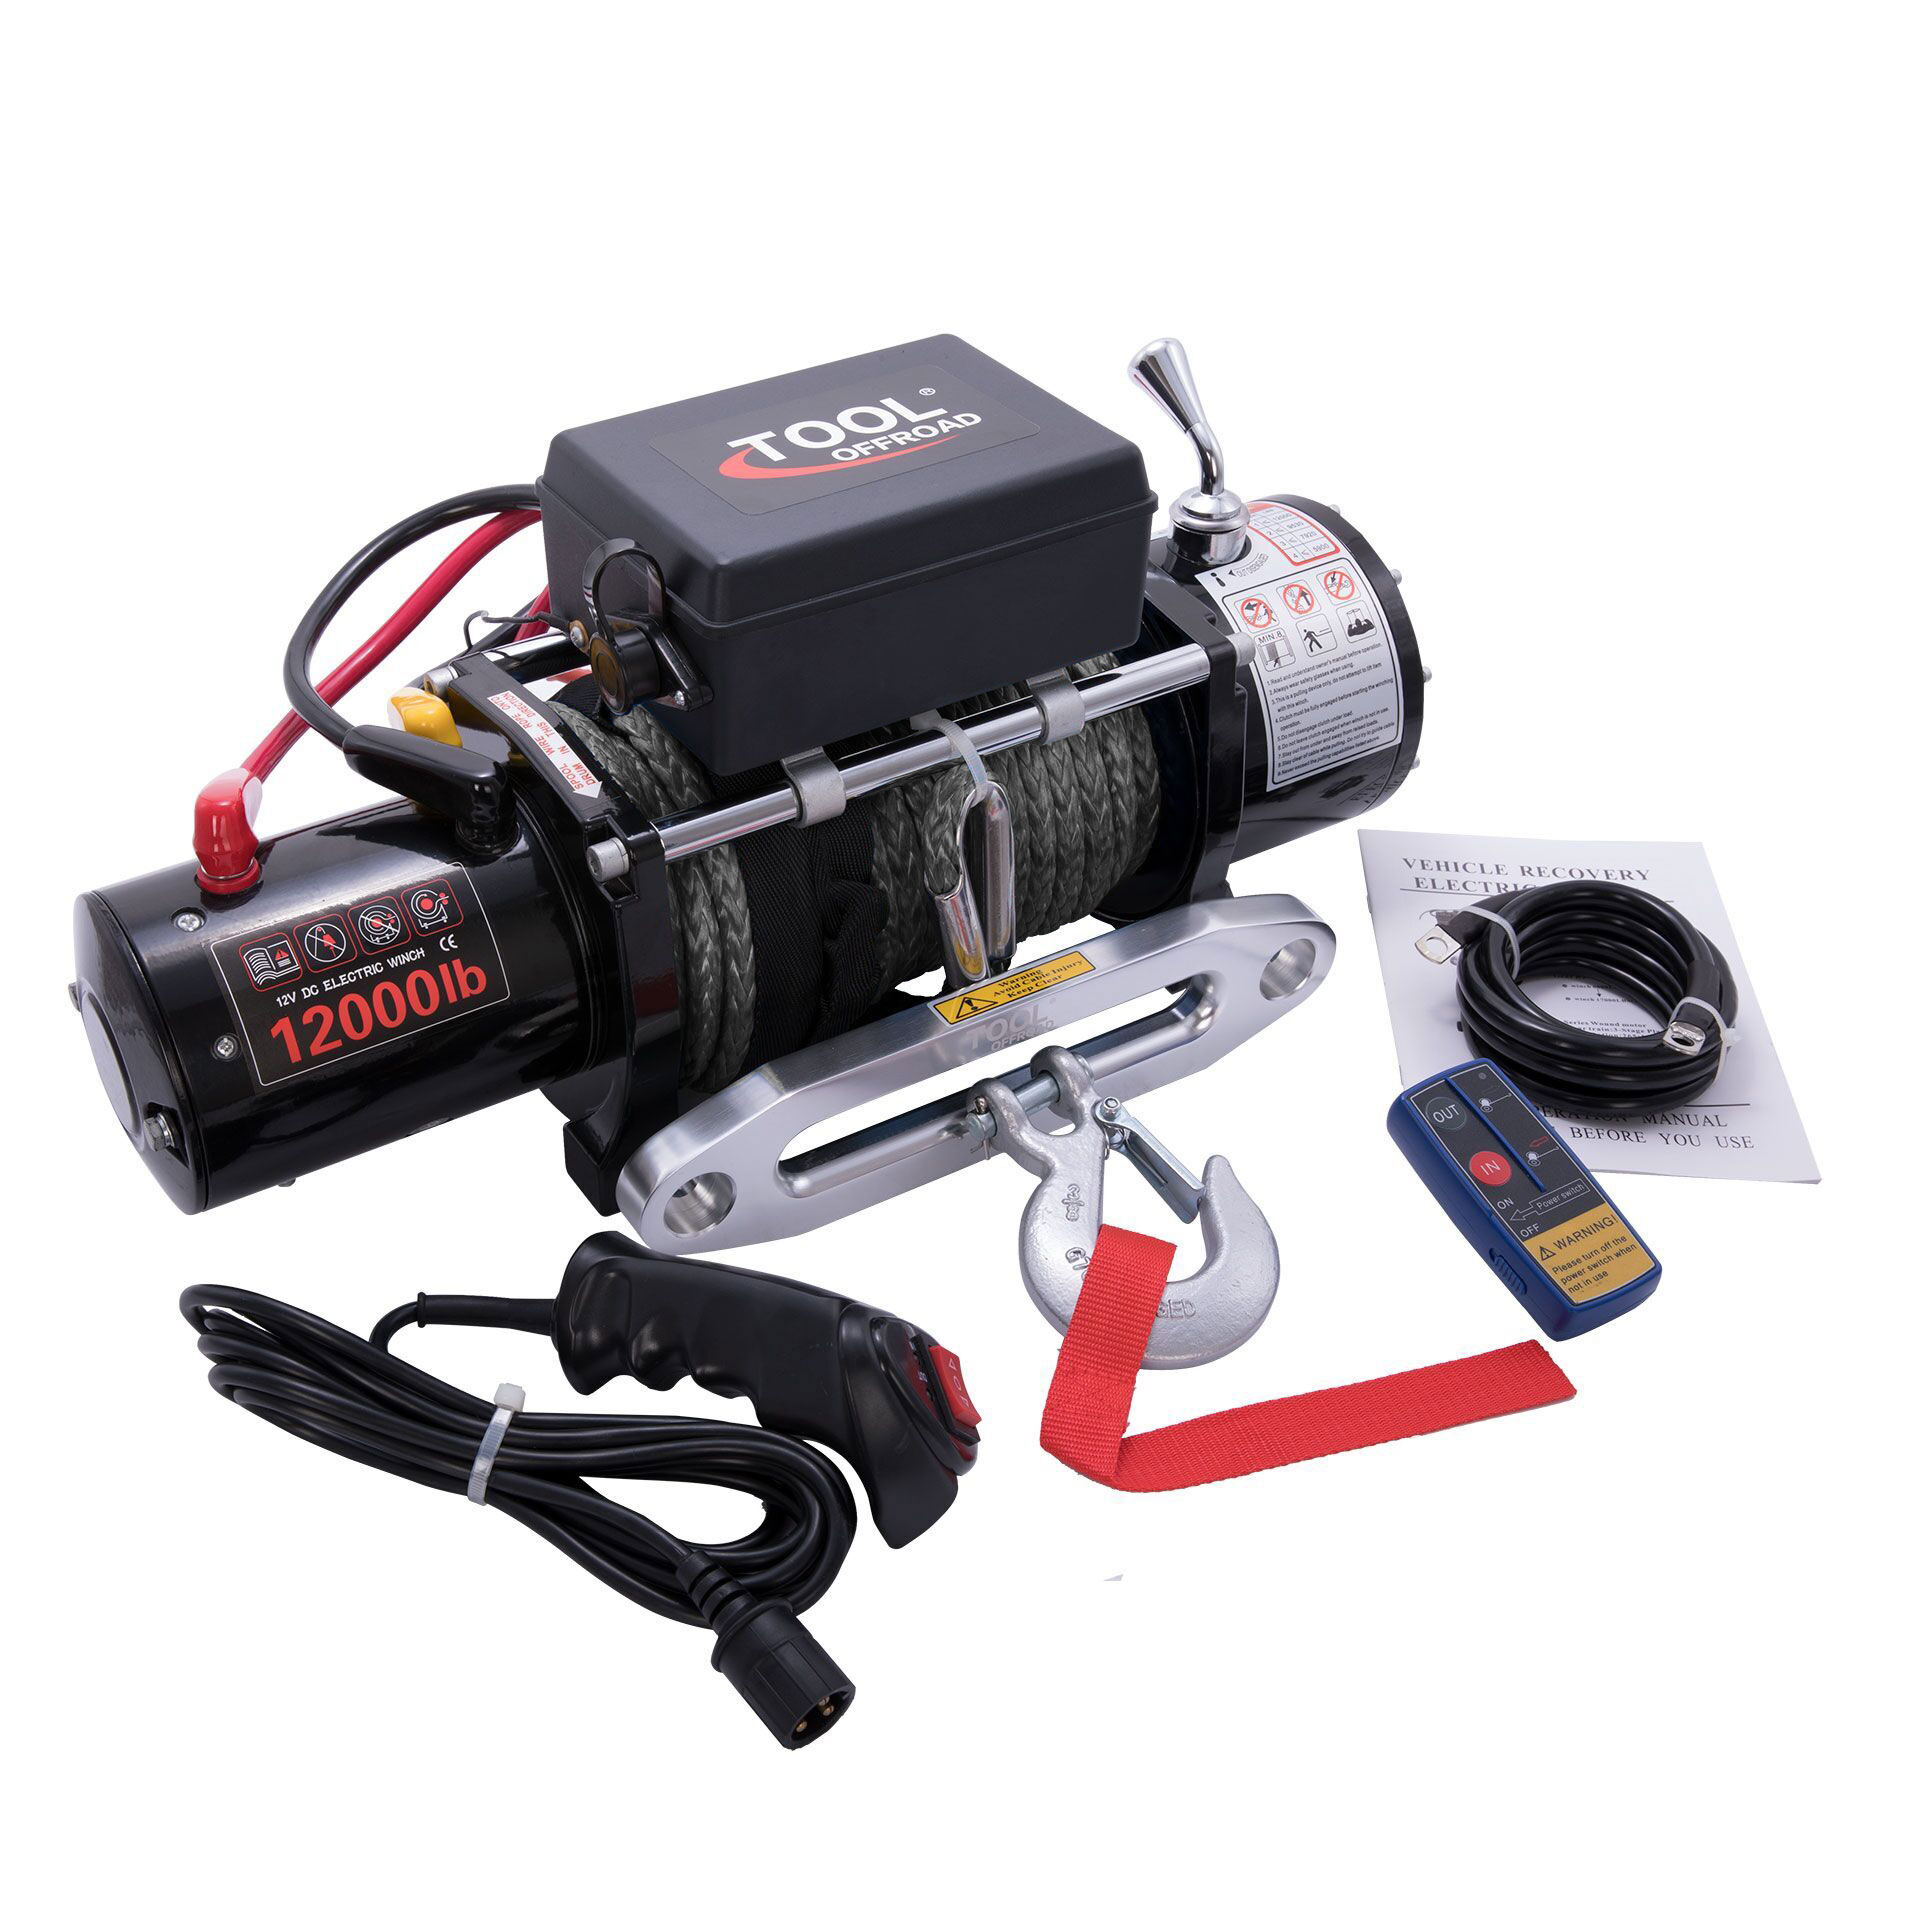  12000Lb Trailer Quiet Brake Car Electric Winch Synthetic Rope 12V Permanent Magnet Motor